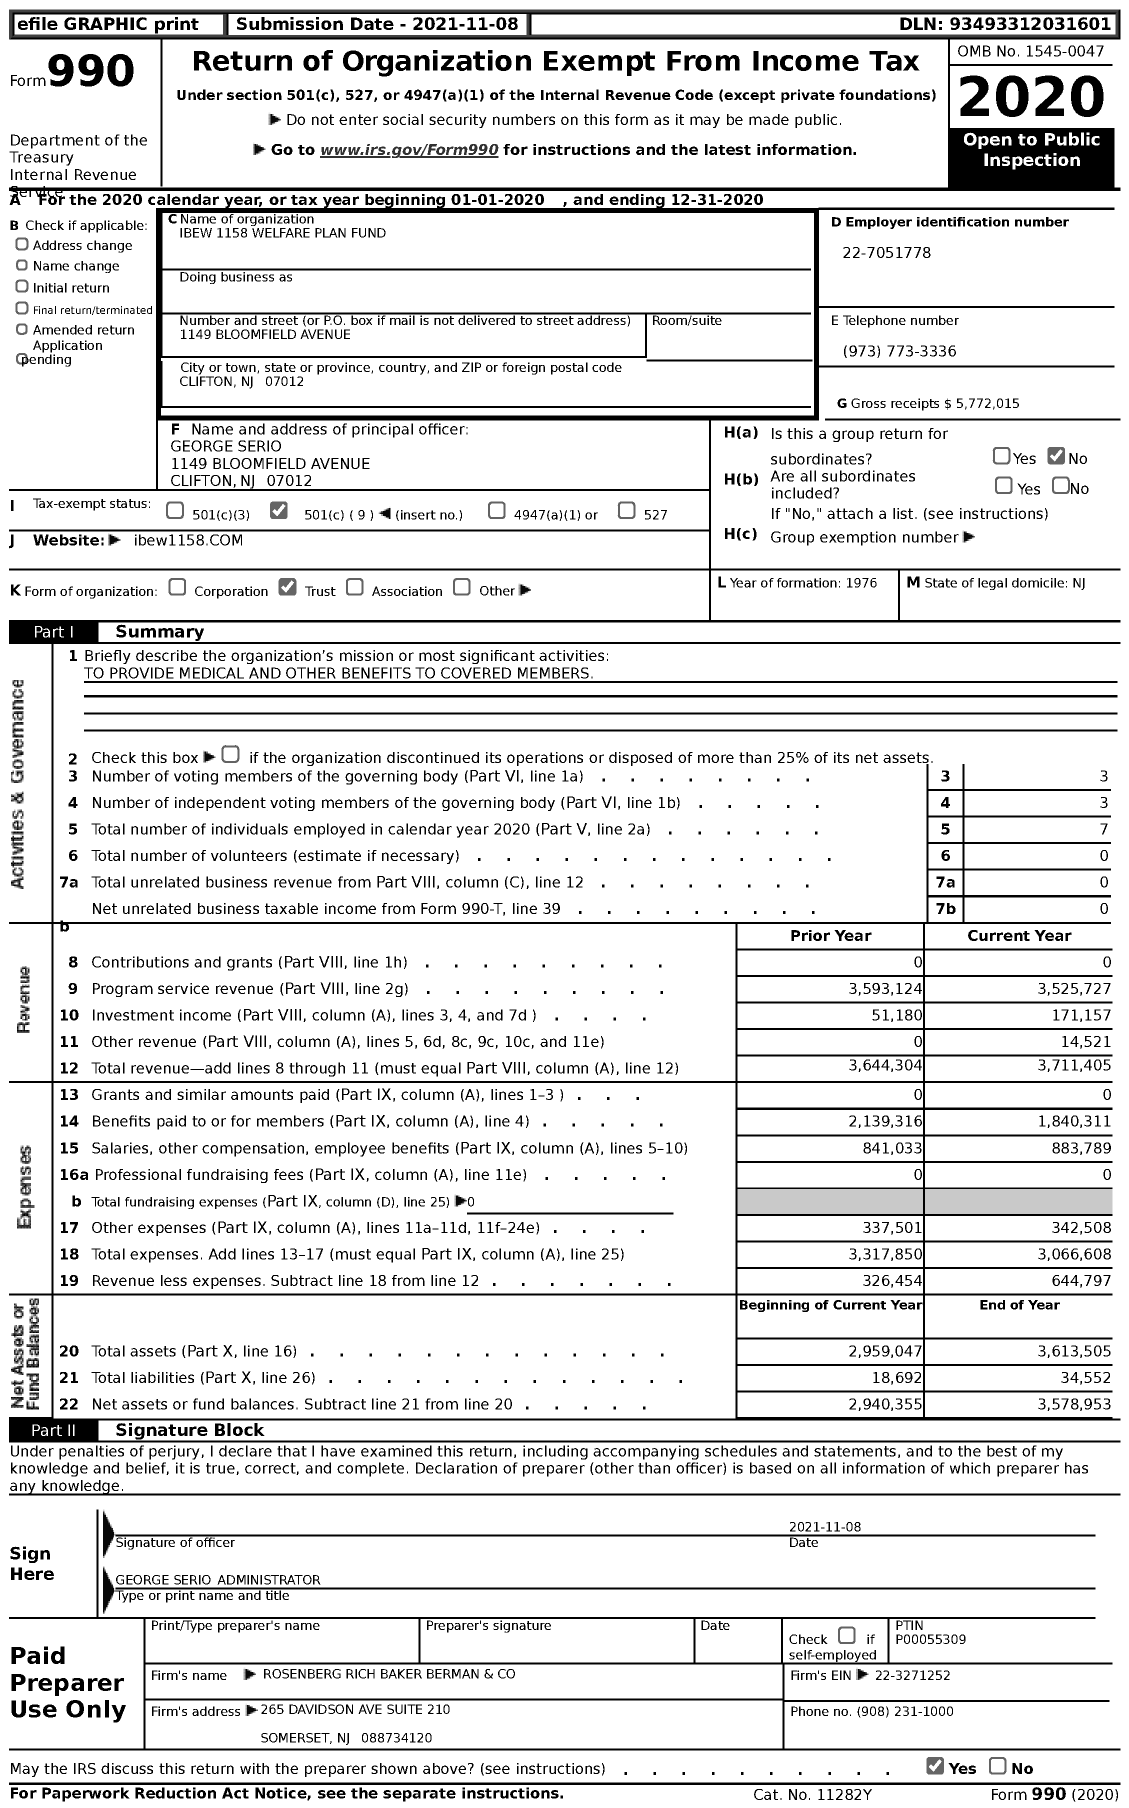 Image of first page of 2020 Form 990 for IBEW 1158 Welfare Plan Fund